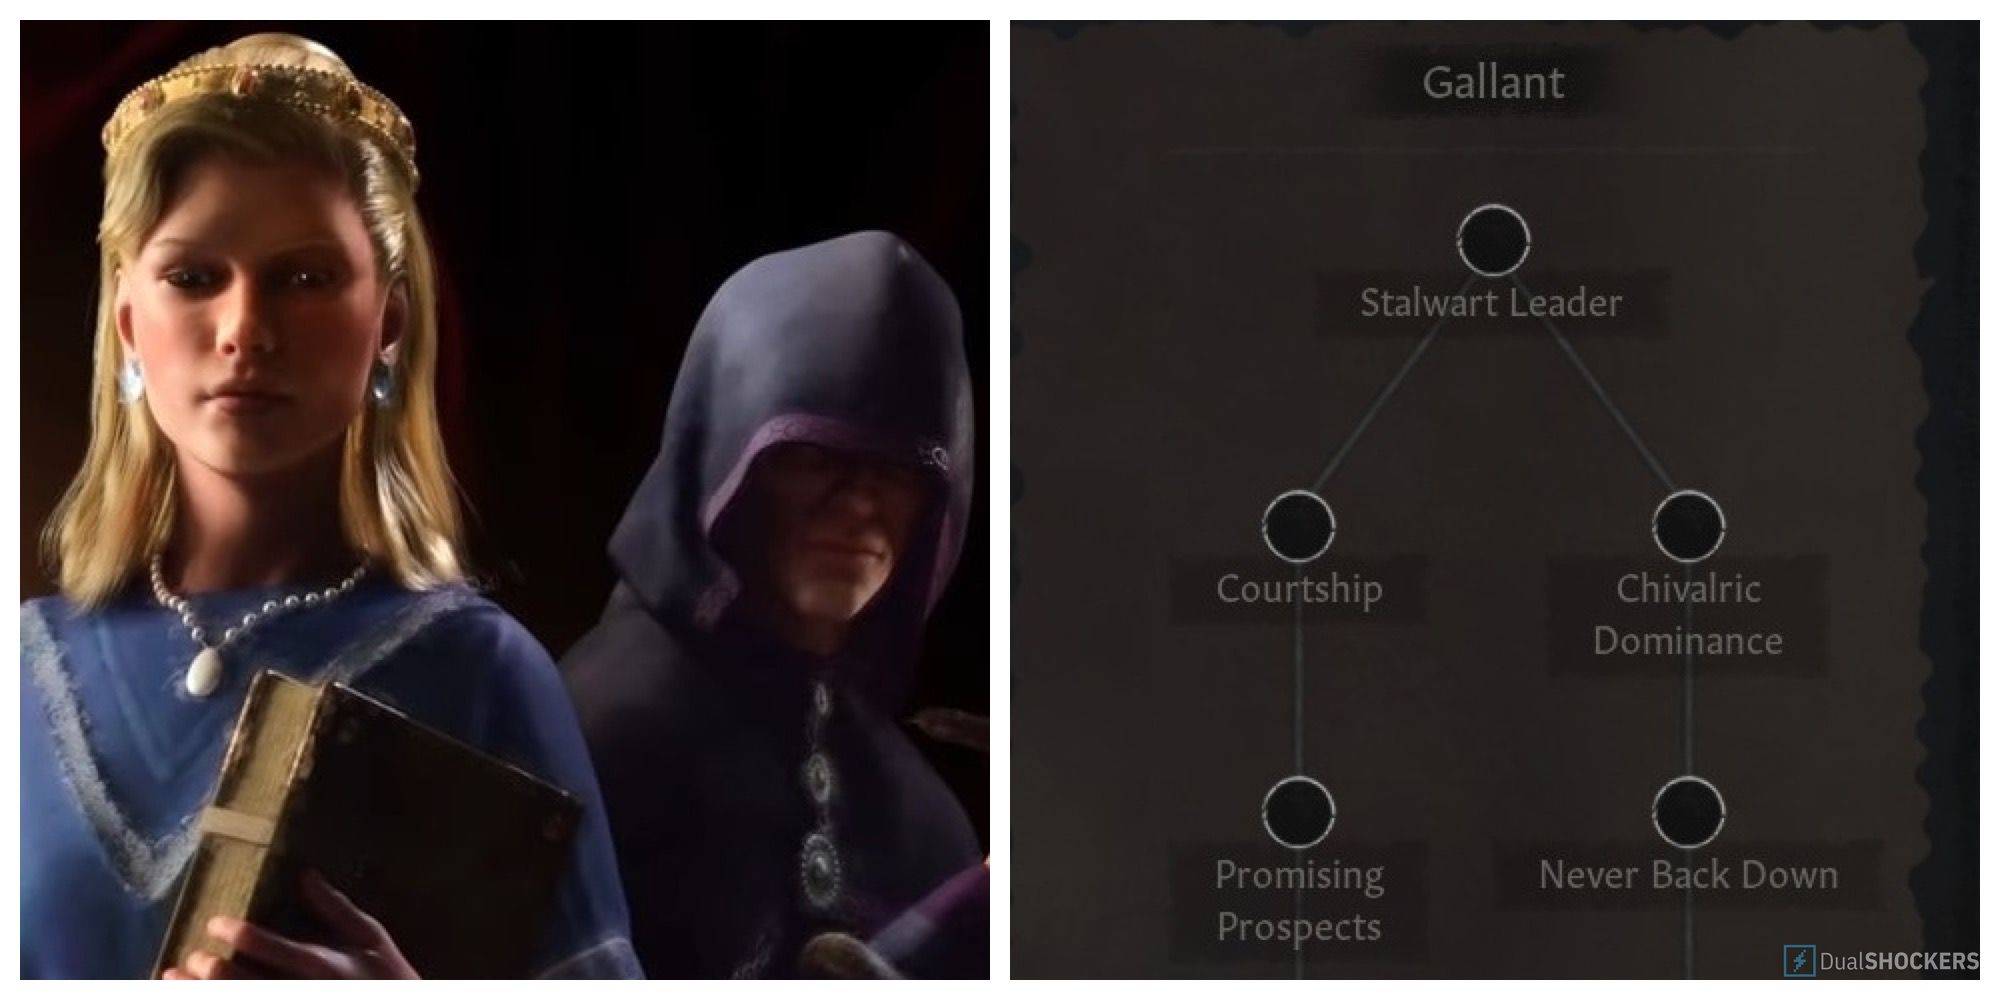 Crusader Kings 3 split image a scholar stands next to a schemer, and a look at the Gallant path in-game menu